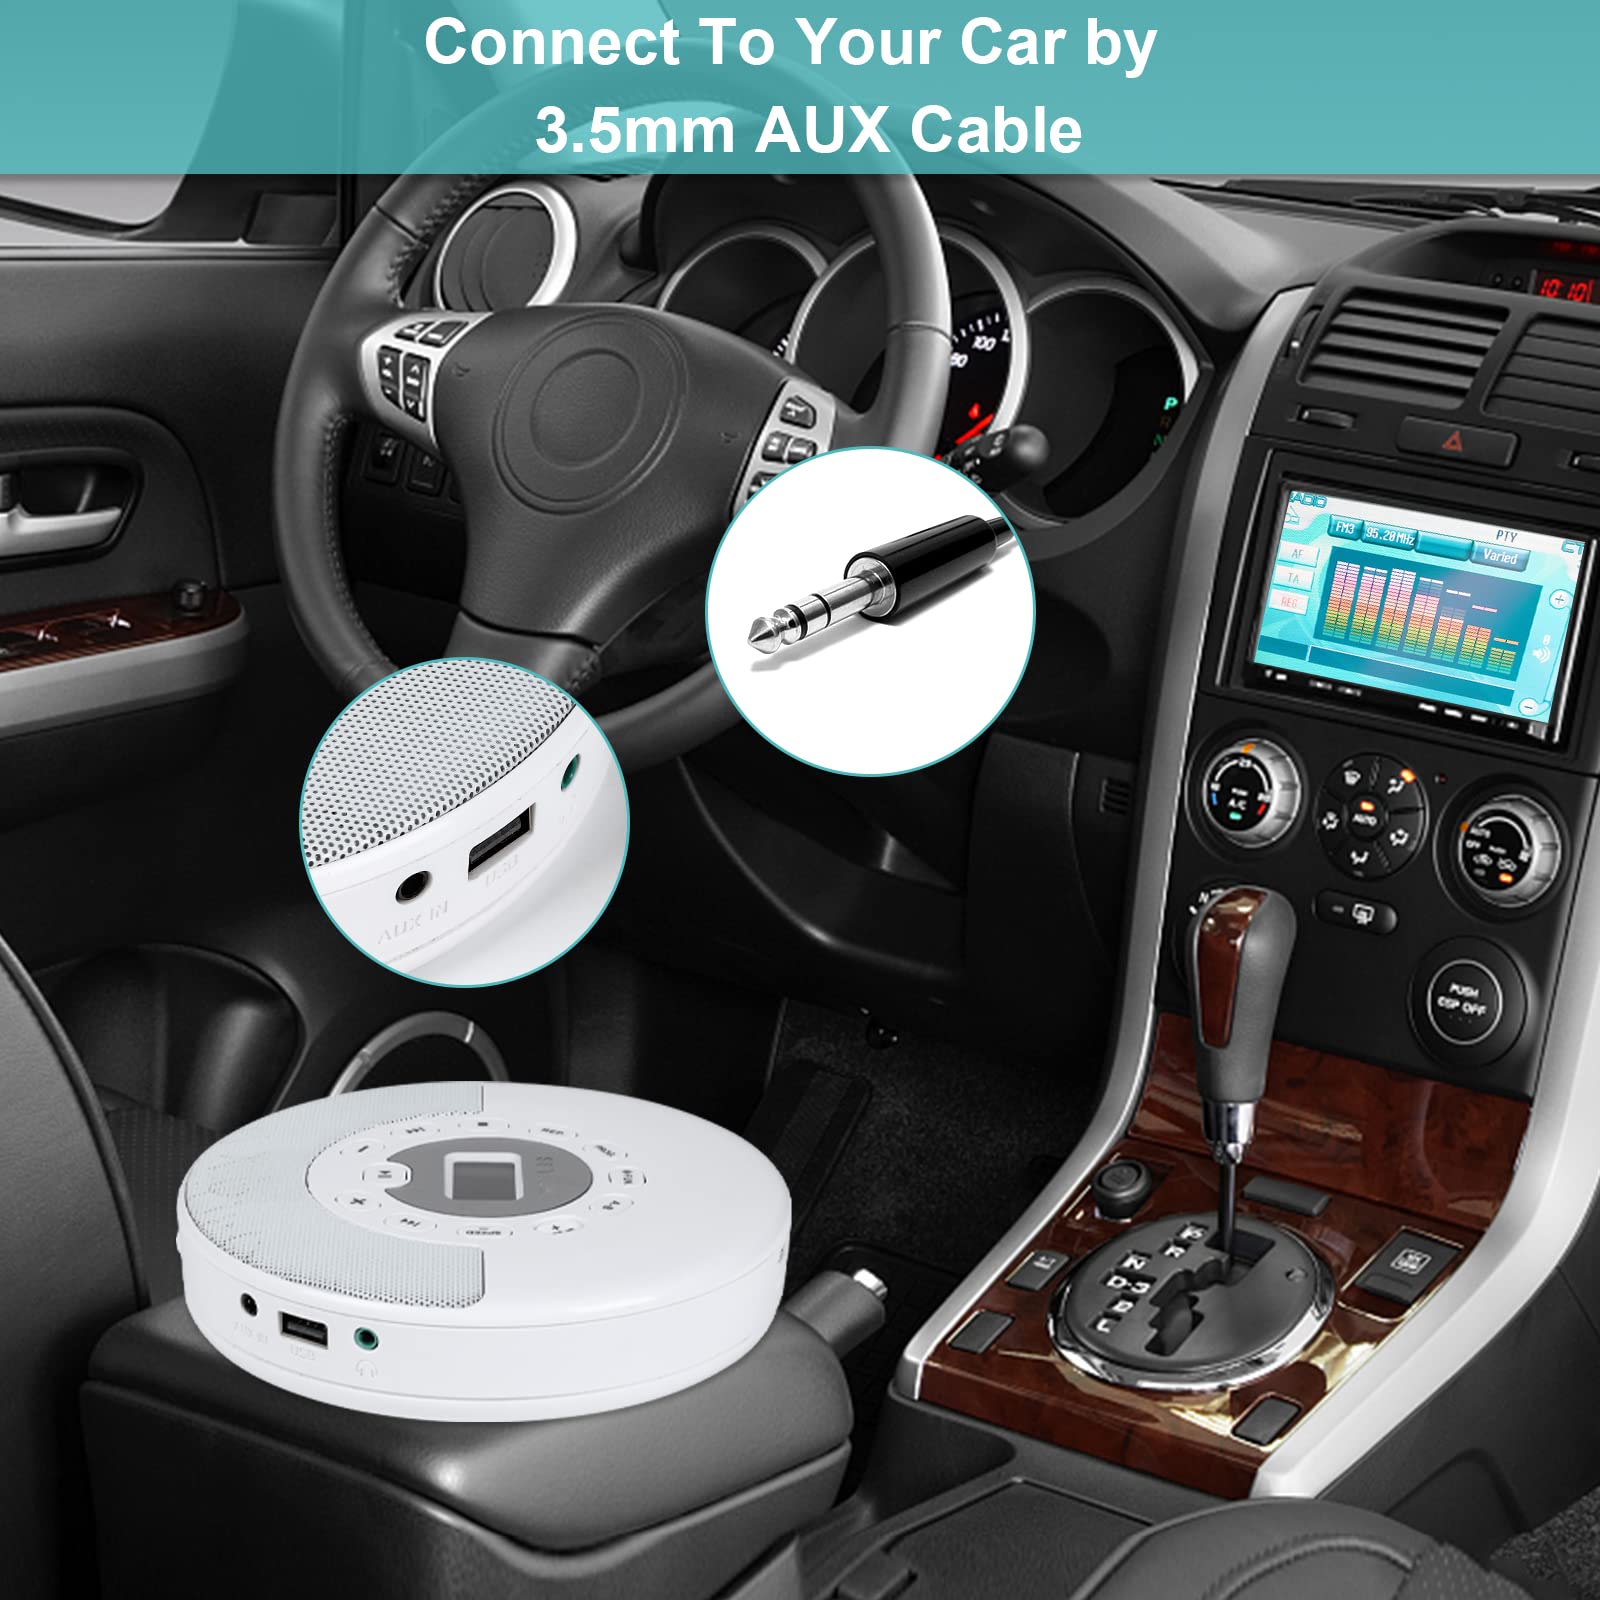 CD Player Portable with Bluetooth - Rechargeable Personal CD Player with Stereo Speakers,Anti-Skip Walkman CD Music Player for Car/Travel with Headphones and AUX Cable,Support CD USB AUX Input